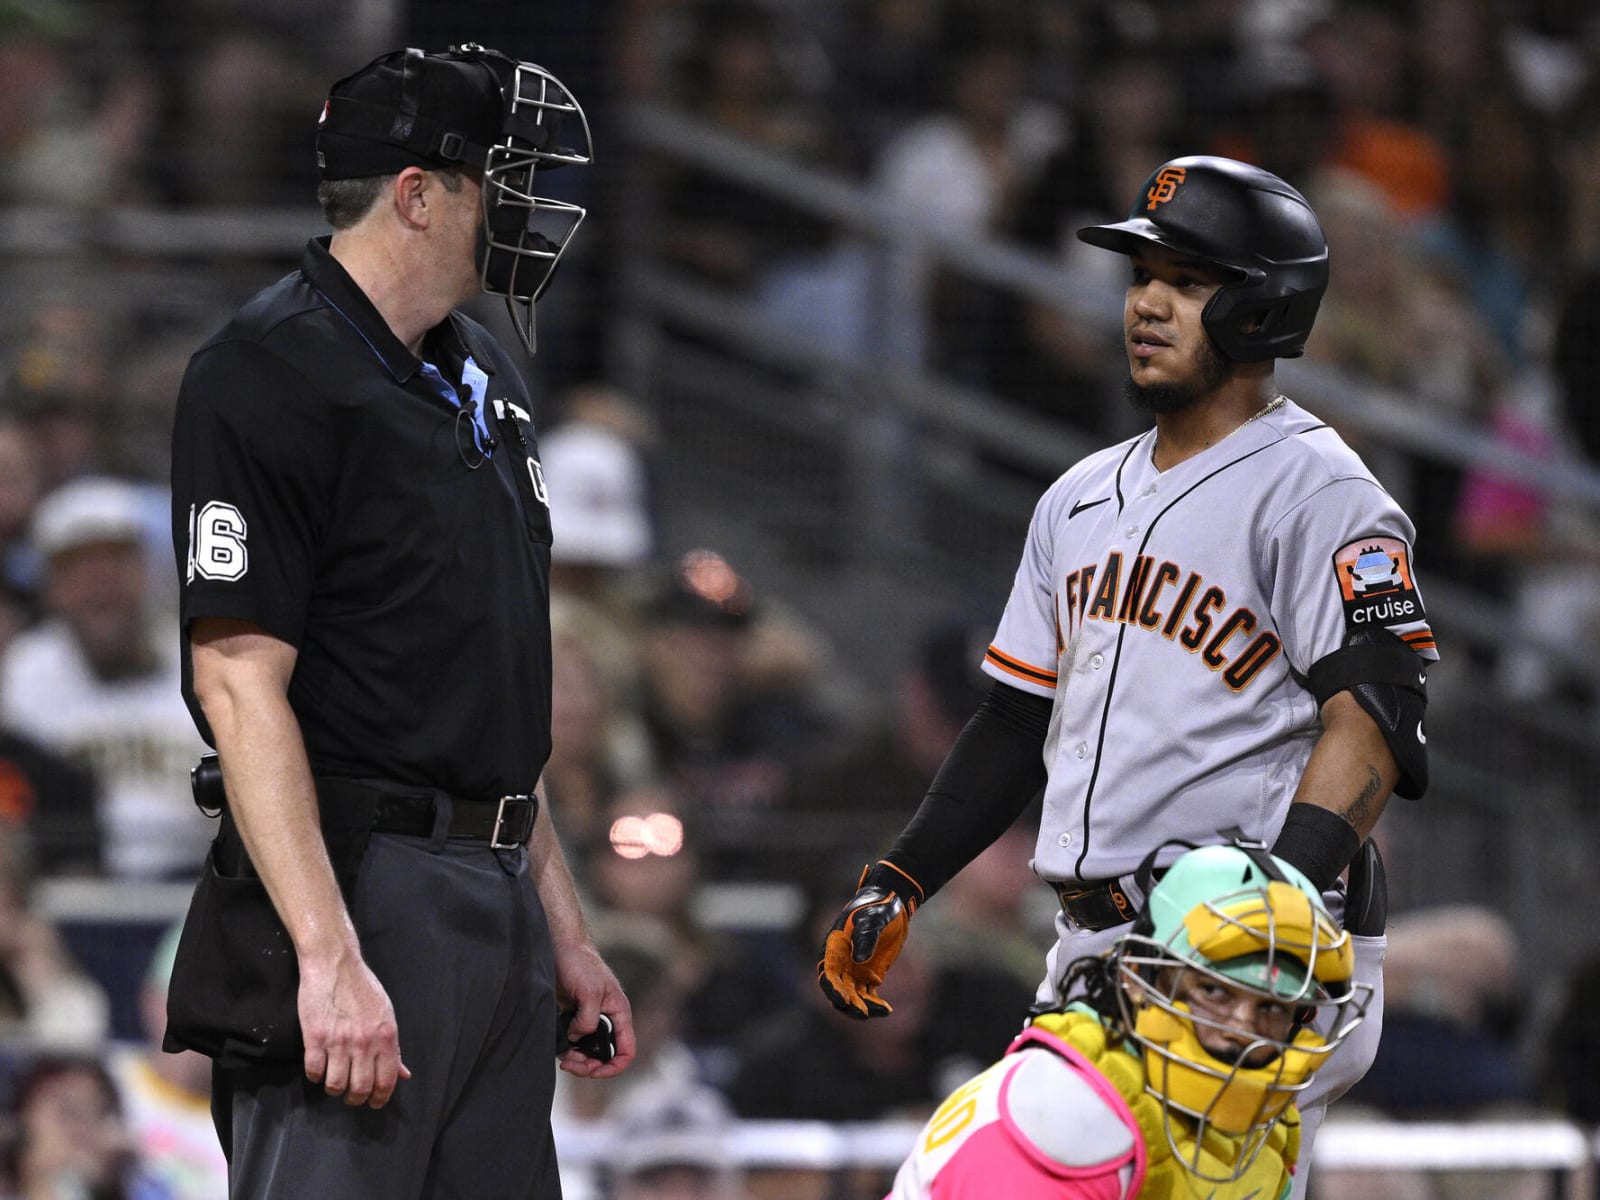 Typical Night for Bonds As Giants Top Rays, 7-3